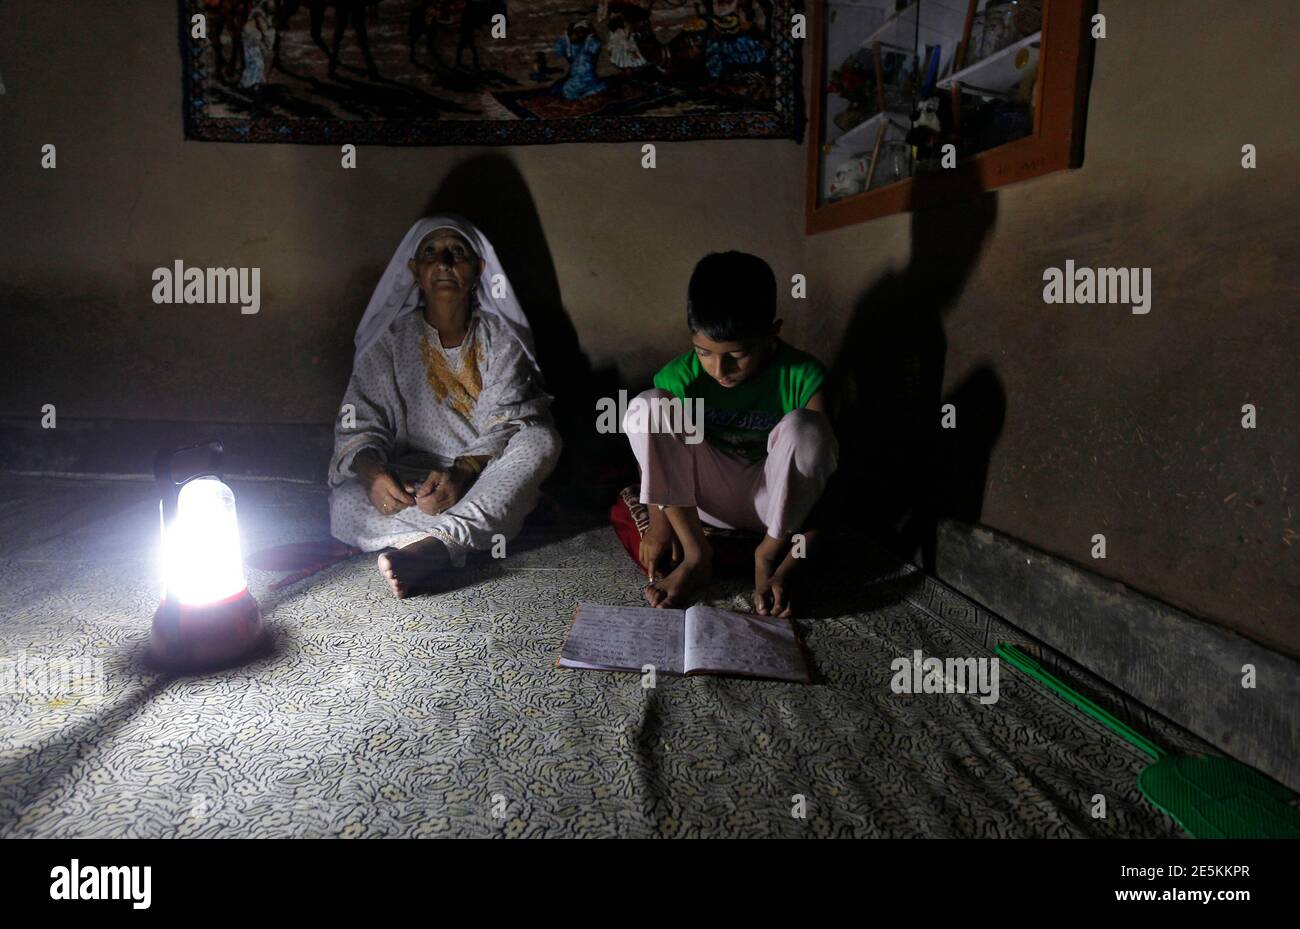 A Kashmiri boy reads a book while sitting next to his grandmother during a power-cut due to curtailment, at their house in Srinagar July 3, 2013. India is betting a gas price hike will boost supply and help fix the country's chronic power shortages, but the plan may falter unless the debt-laden industry can pass on higher energy costs to consumers or win government subsidies. Picture taken July 3, 2013. To match INDIA-POWER/ REUTERS/Danish Ismail (INDIAN-ADMINISTERD KASHMIR - Tags: POLITICS BUSINESS INDUSTRIAL ENERGY) Stock Photo